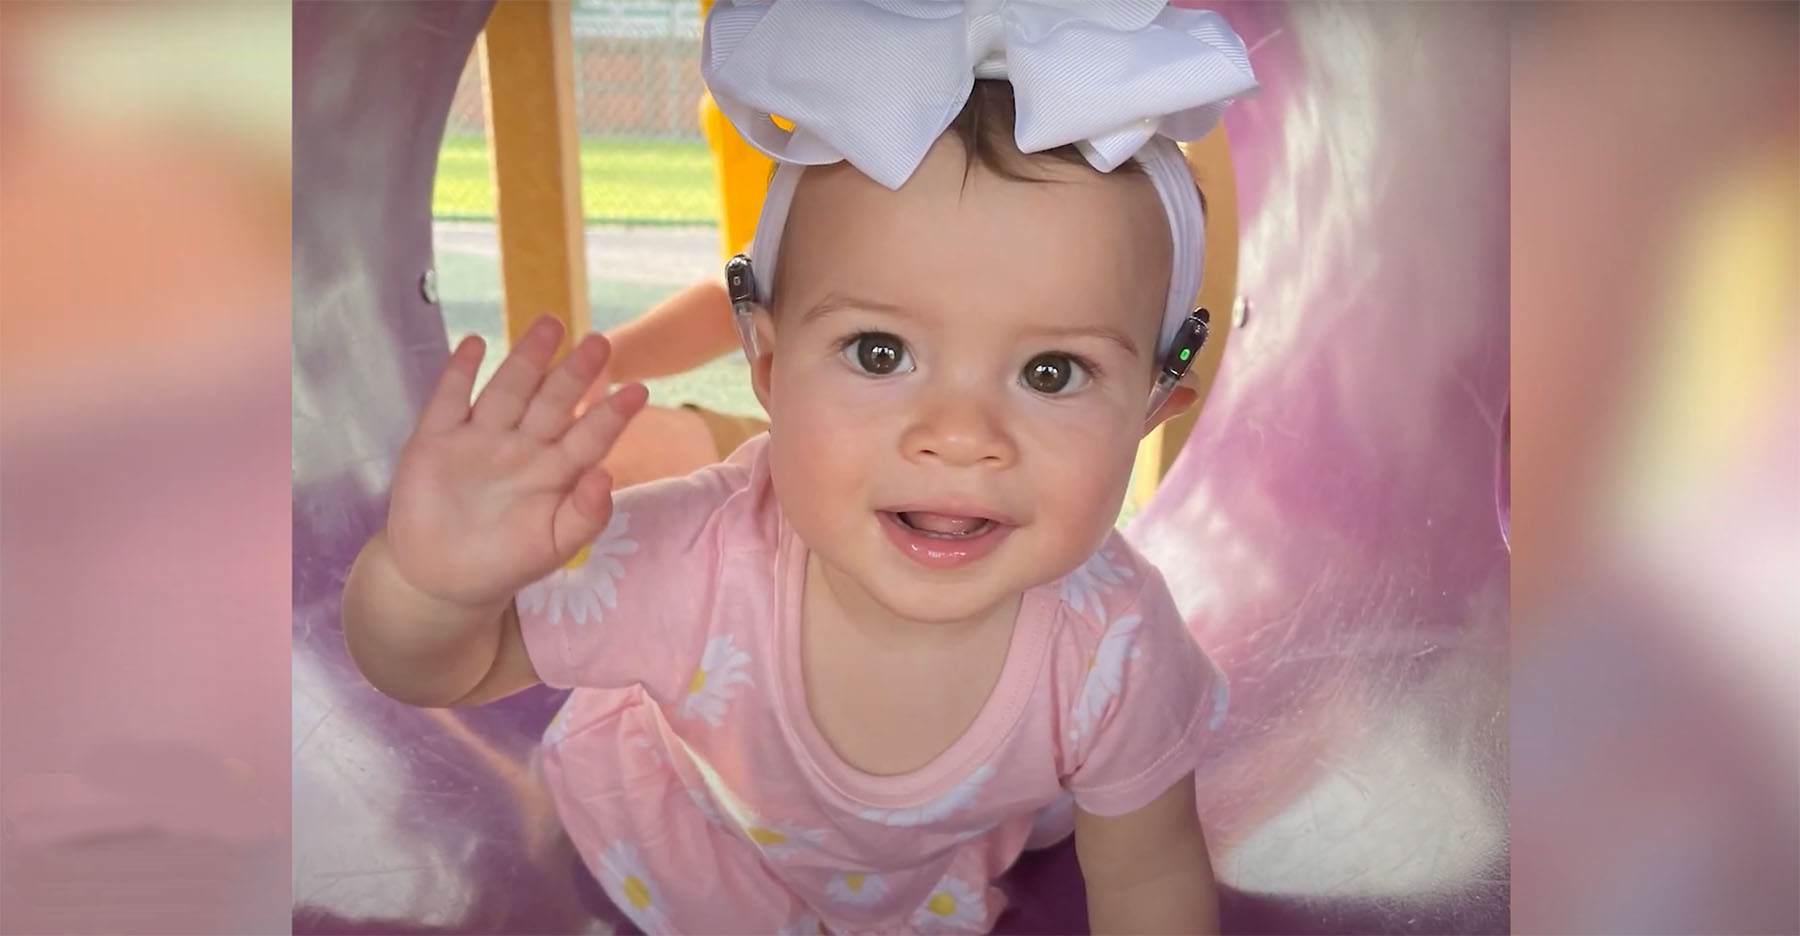 Adorable baby with cochlear implants playing